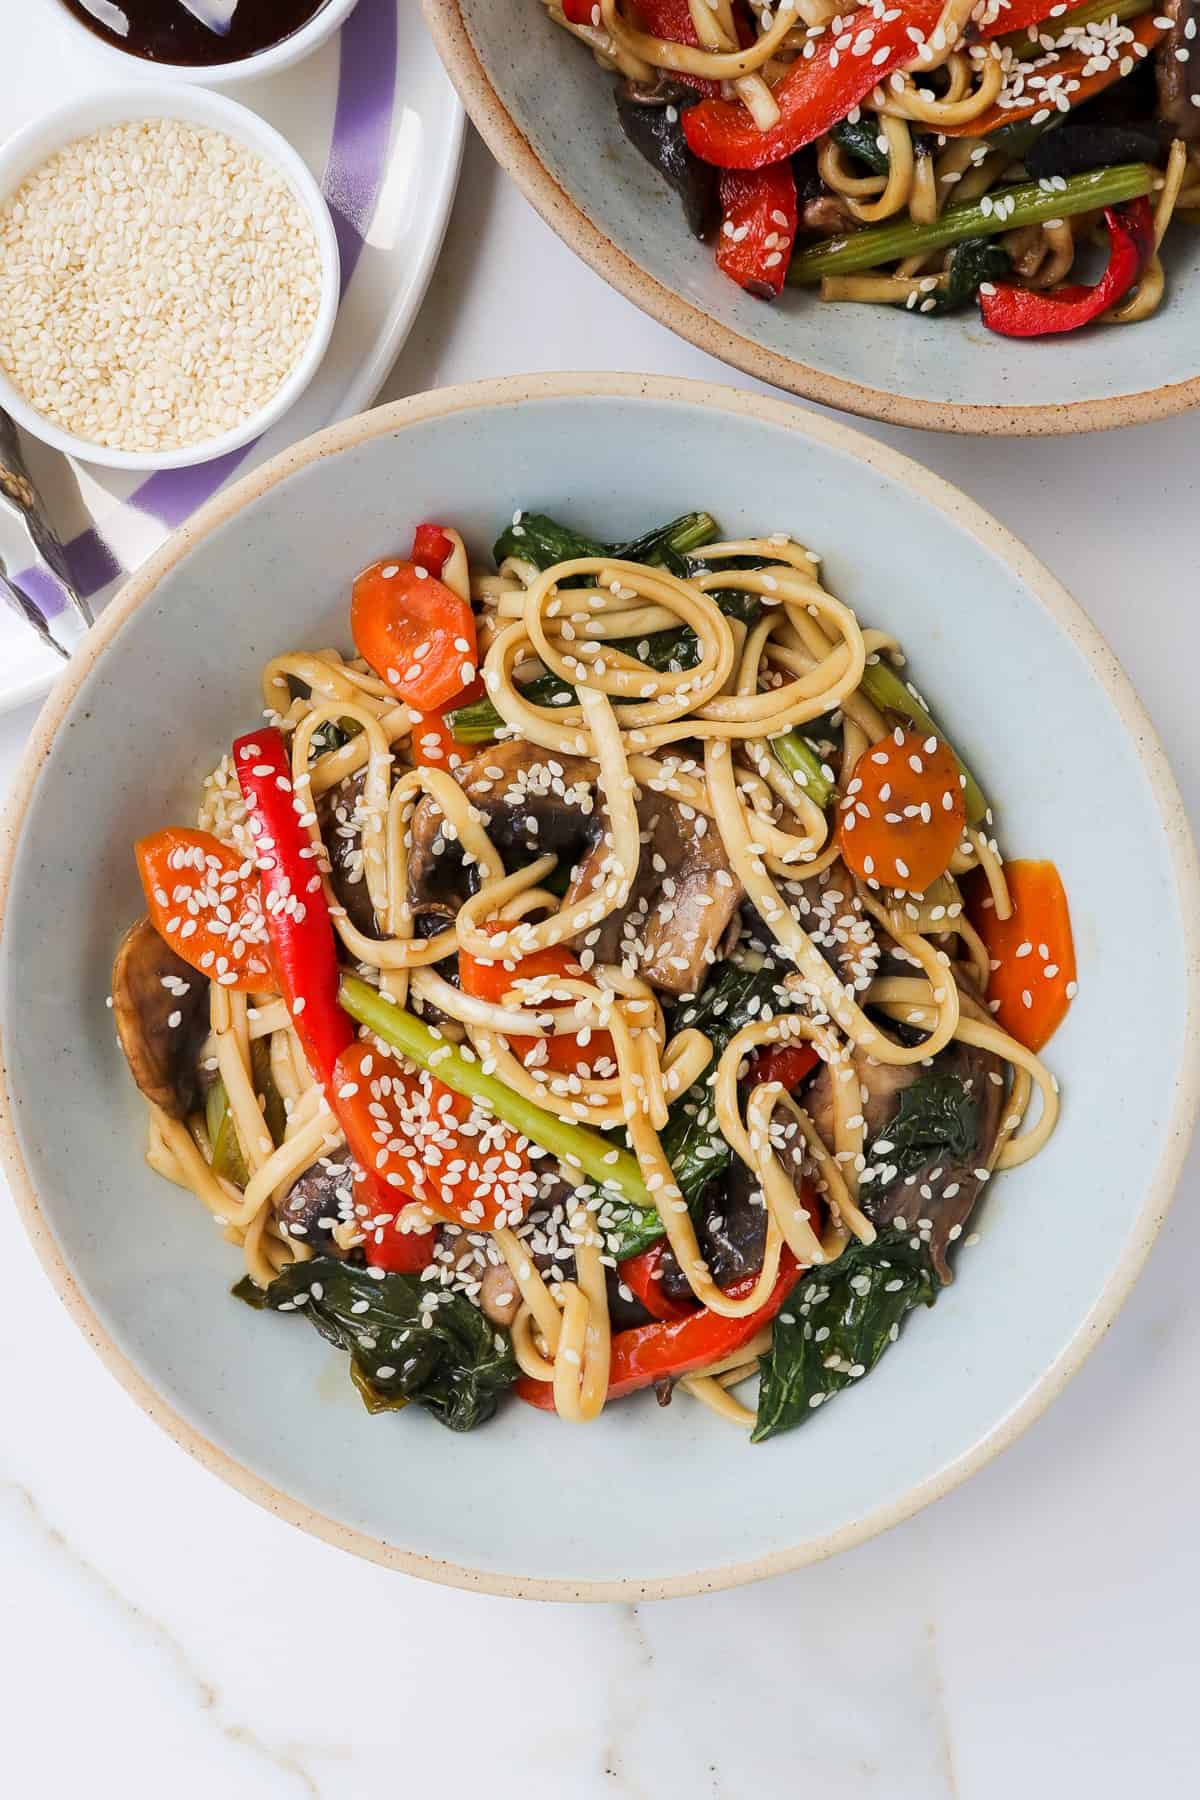 Teriyaki udon noodles with vegetables and sesame seeds in a bowl.